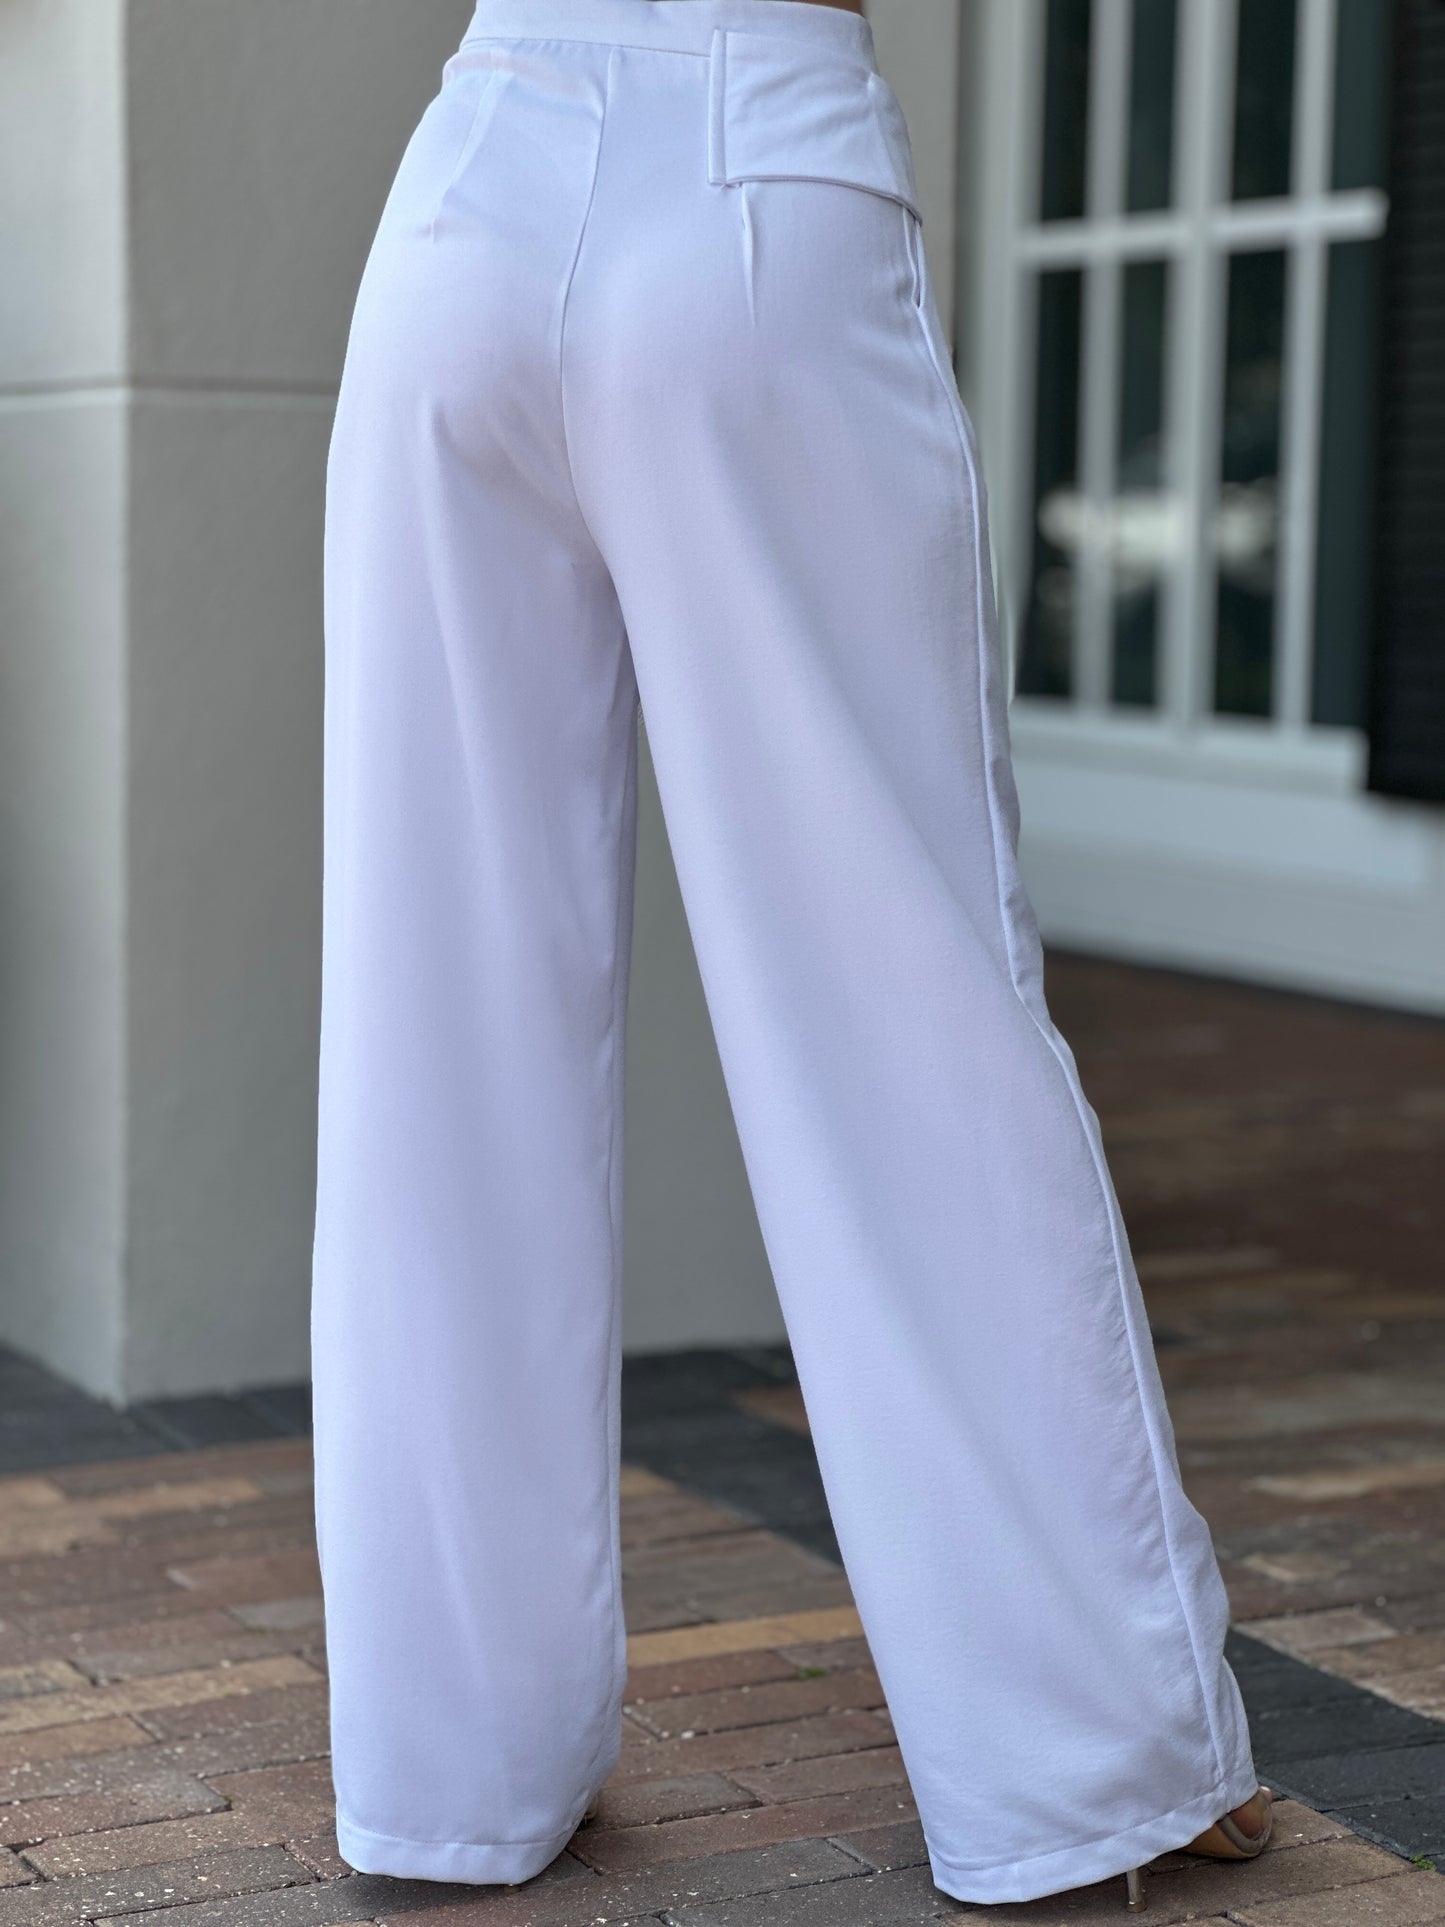 Addie Crossed Button White Pants